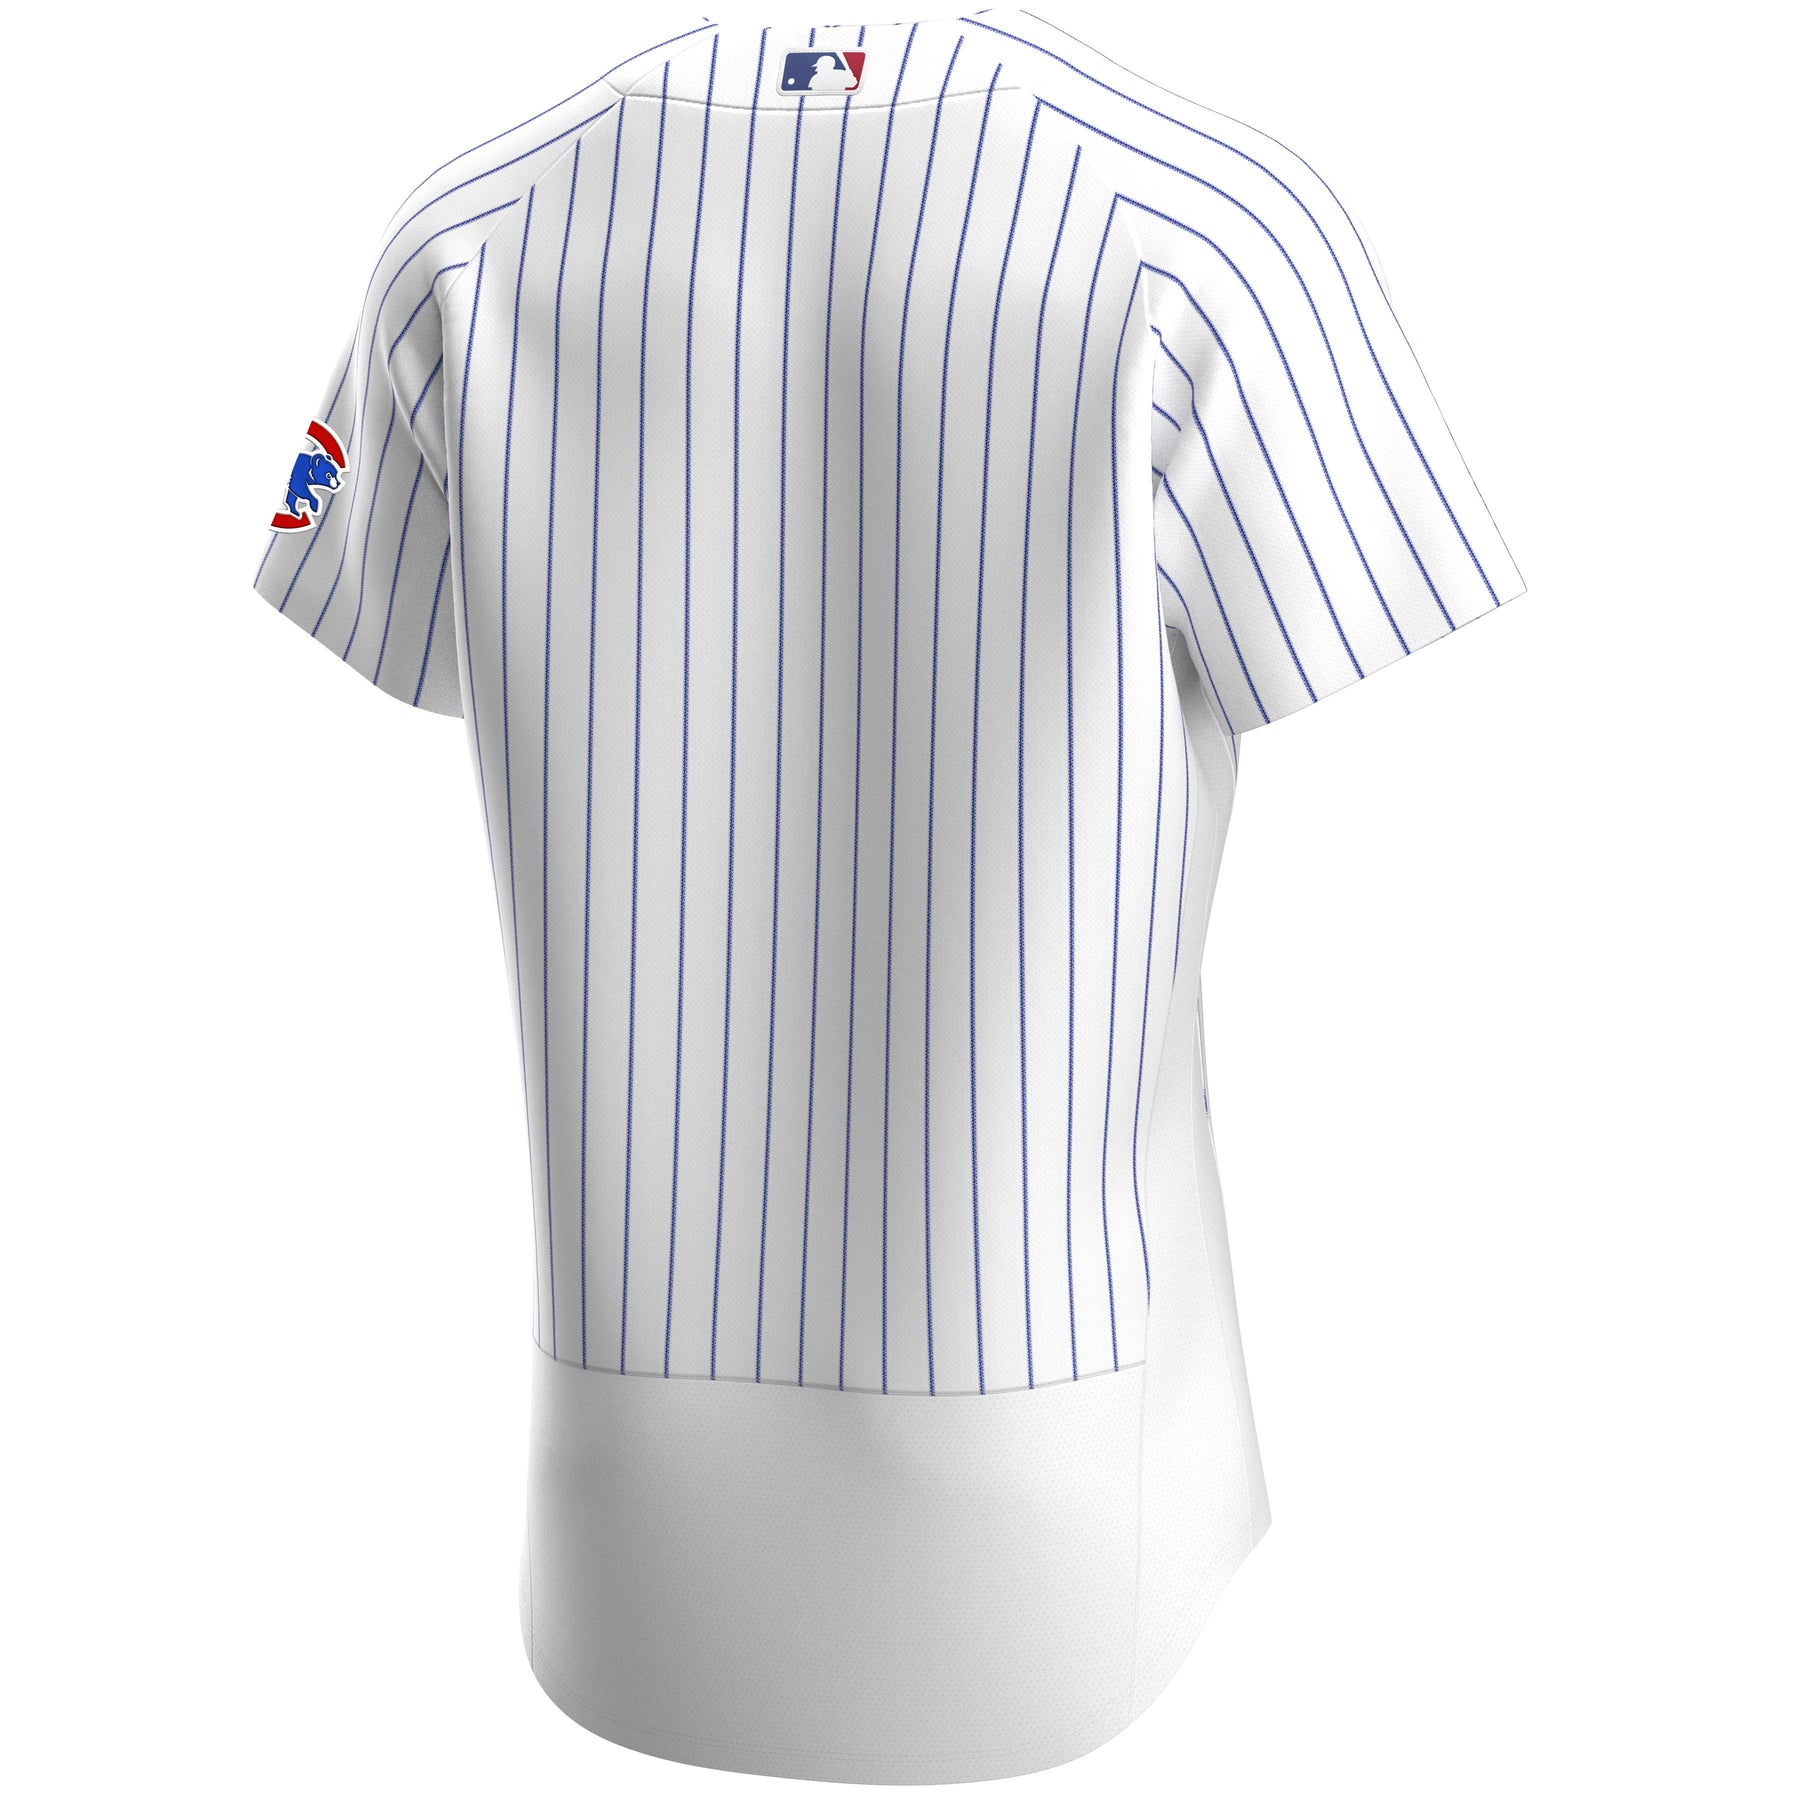 Authentic Chicago Cubs Jersey Home